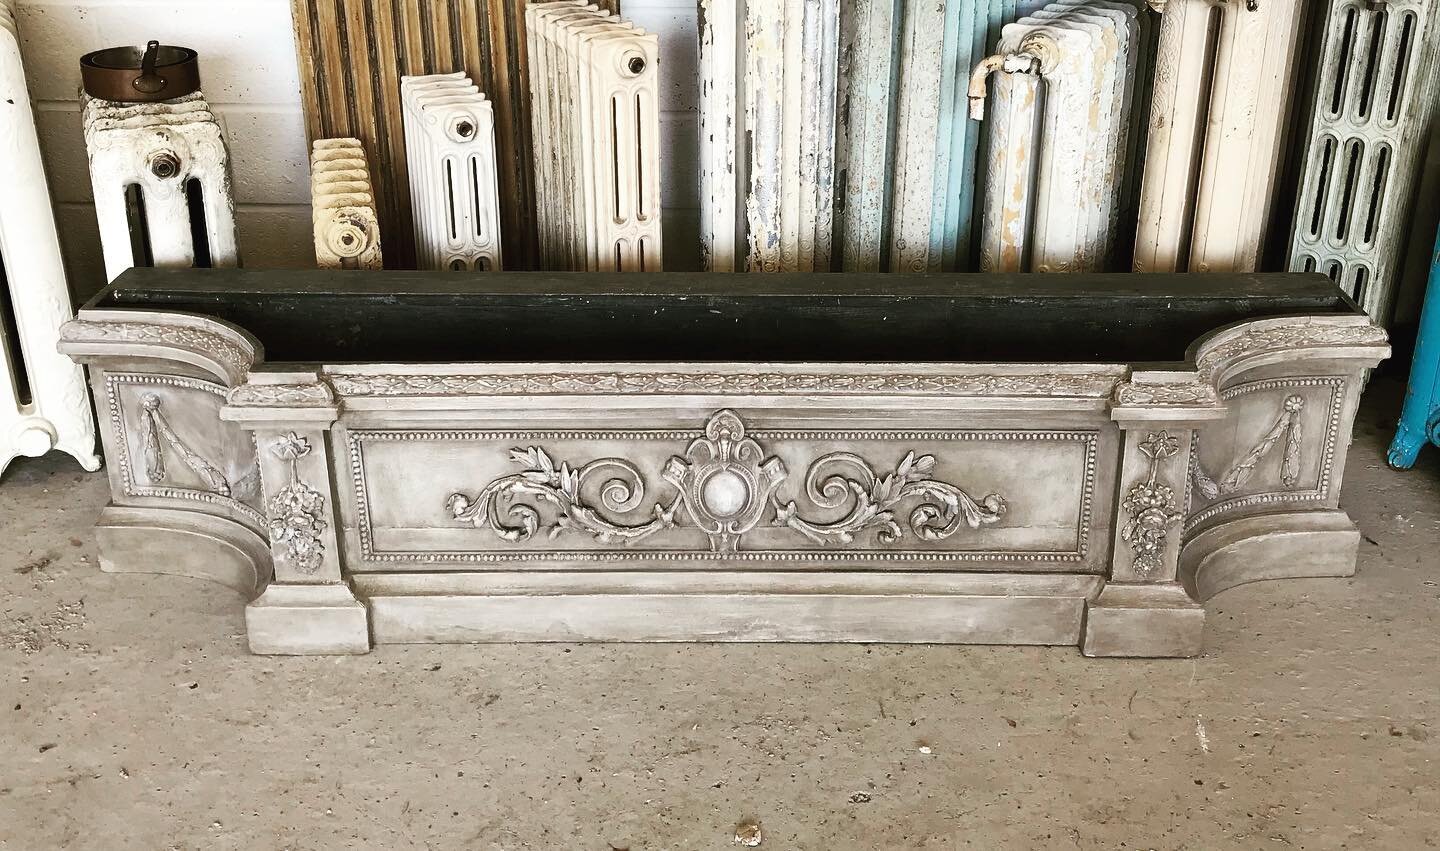 Huge country house painted pine window seat, soon to have the top reupholstered
#antiques #interiordesign #interiors #interiordecor #antiquedealer #london #anitquegardenfurniture #architecturalantiques #architecturalsalvage #paris #frenchantiques #an